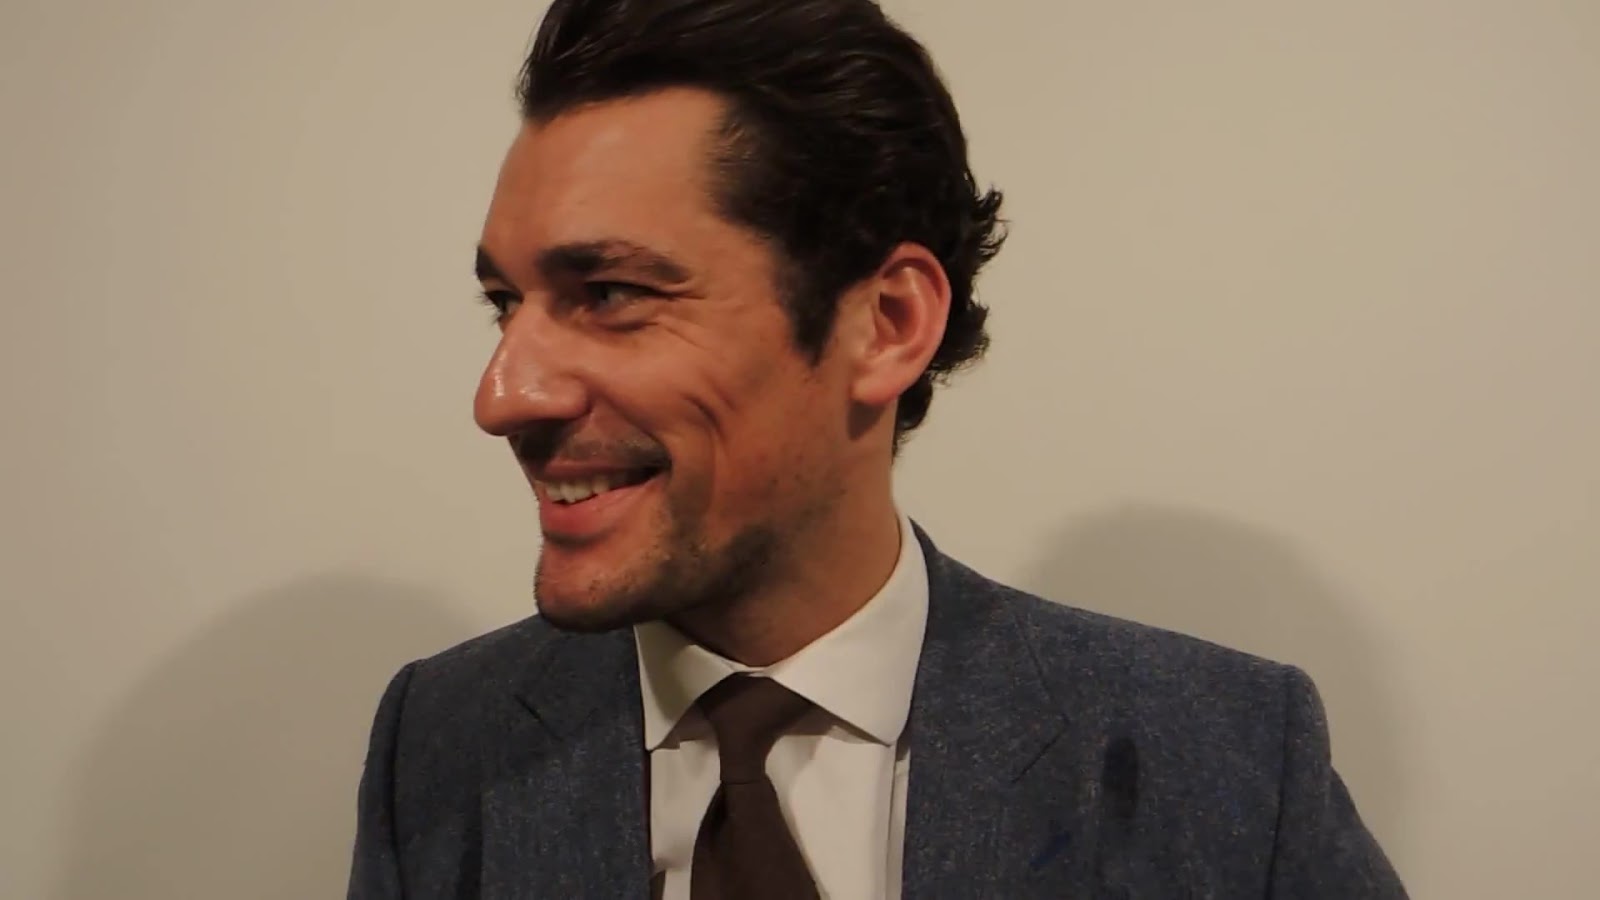 David+Gandy+Interview+-+What+it+Takes+to+Become+a+Model+367.jpg